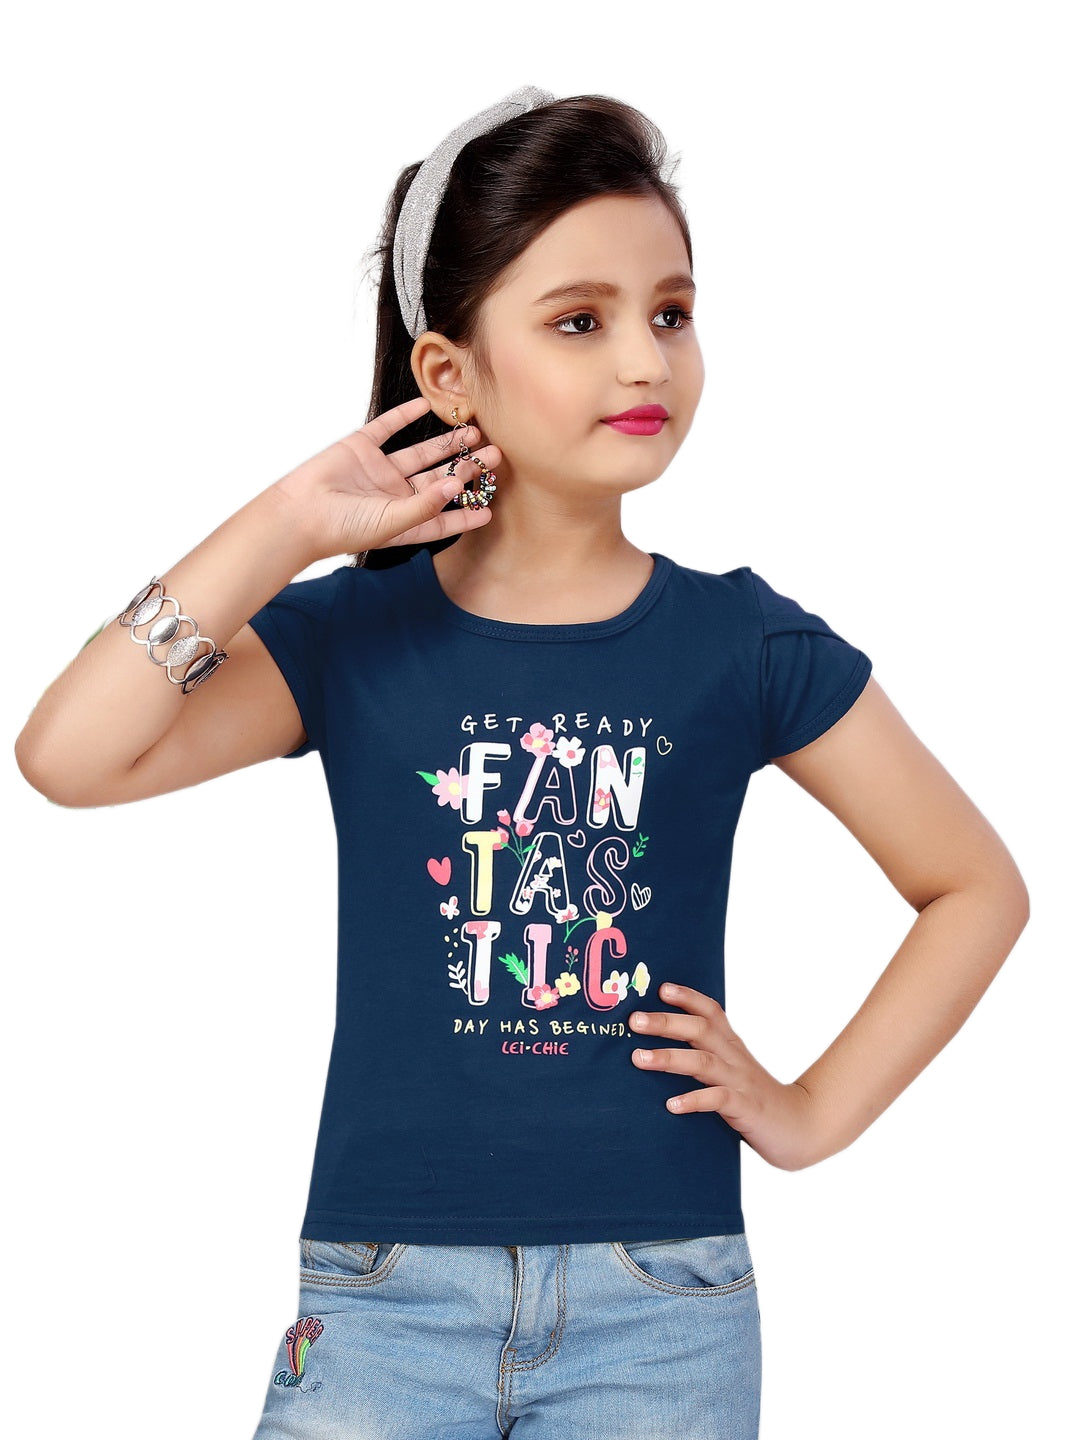 Stylish Navy Top With Screen printed Design #2054